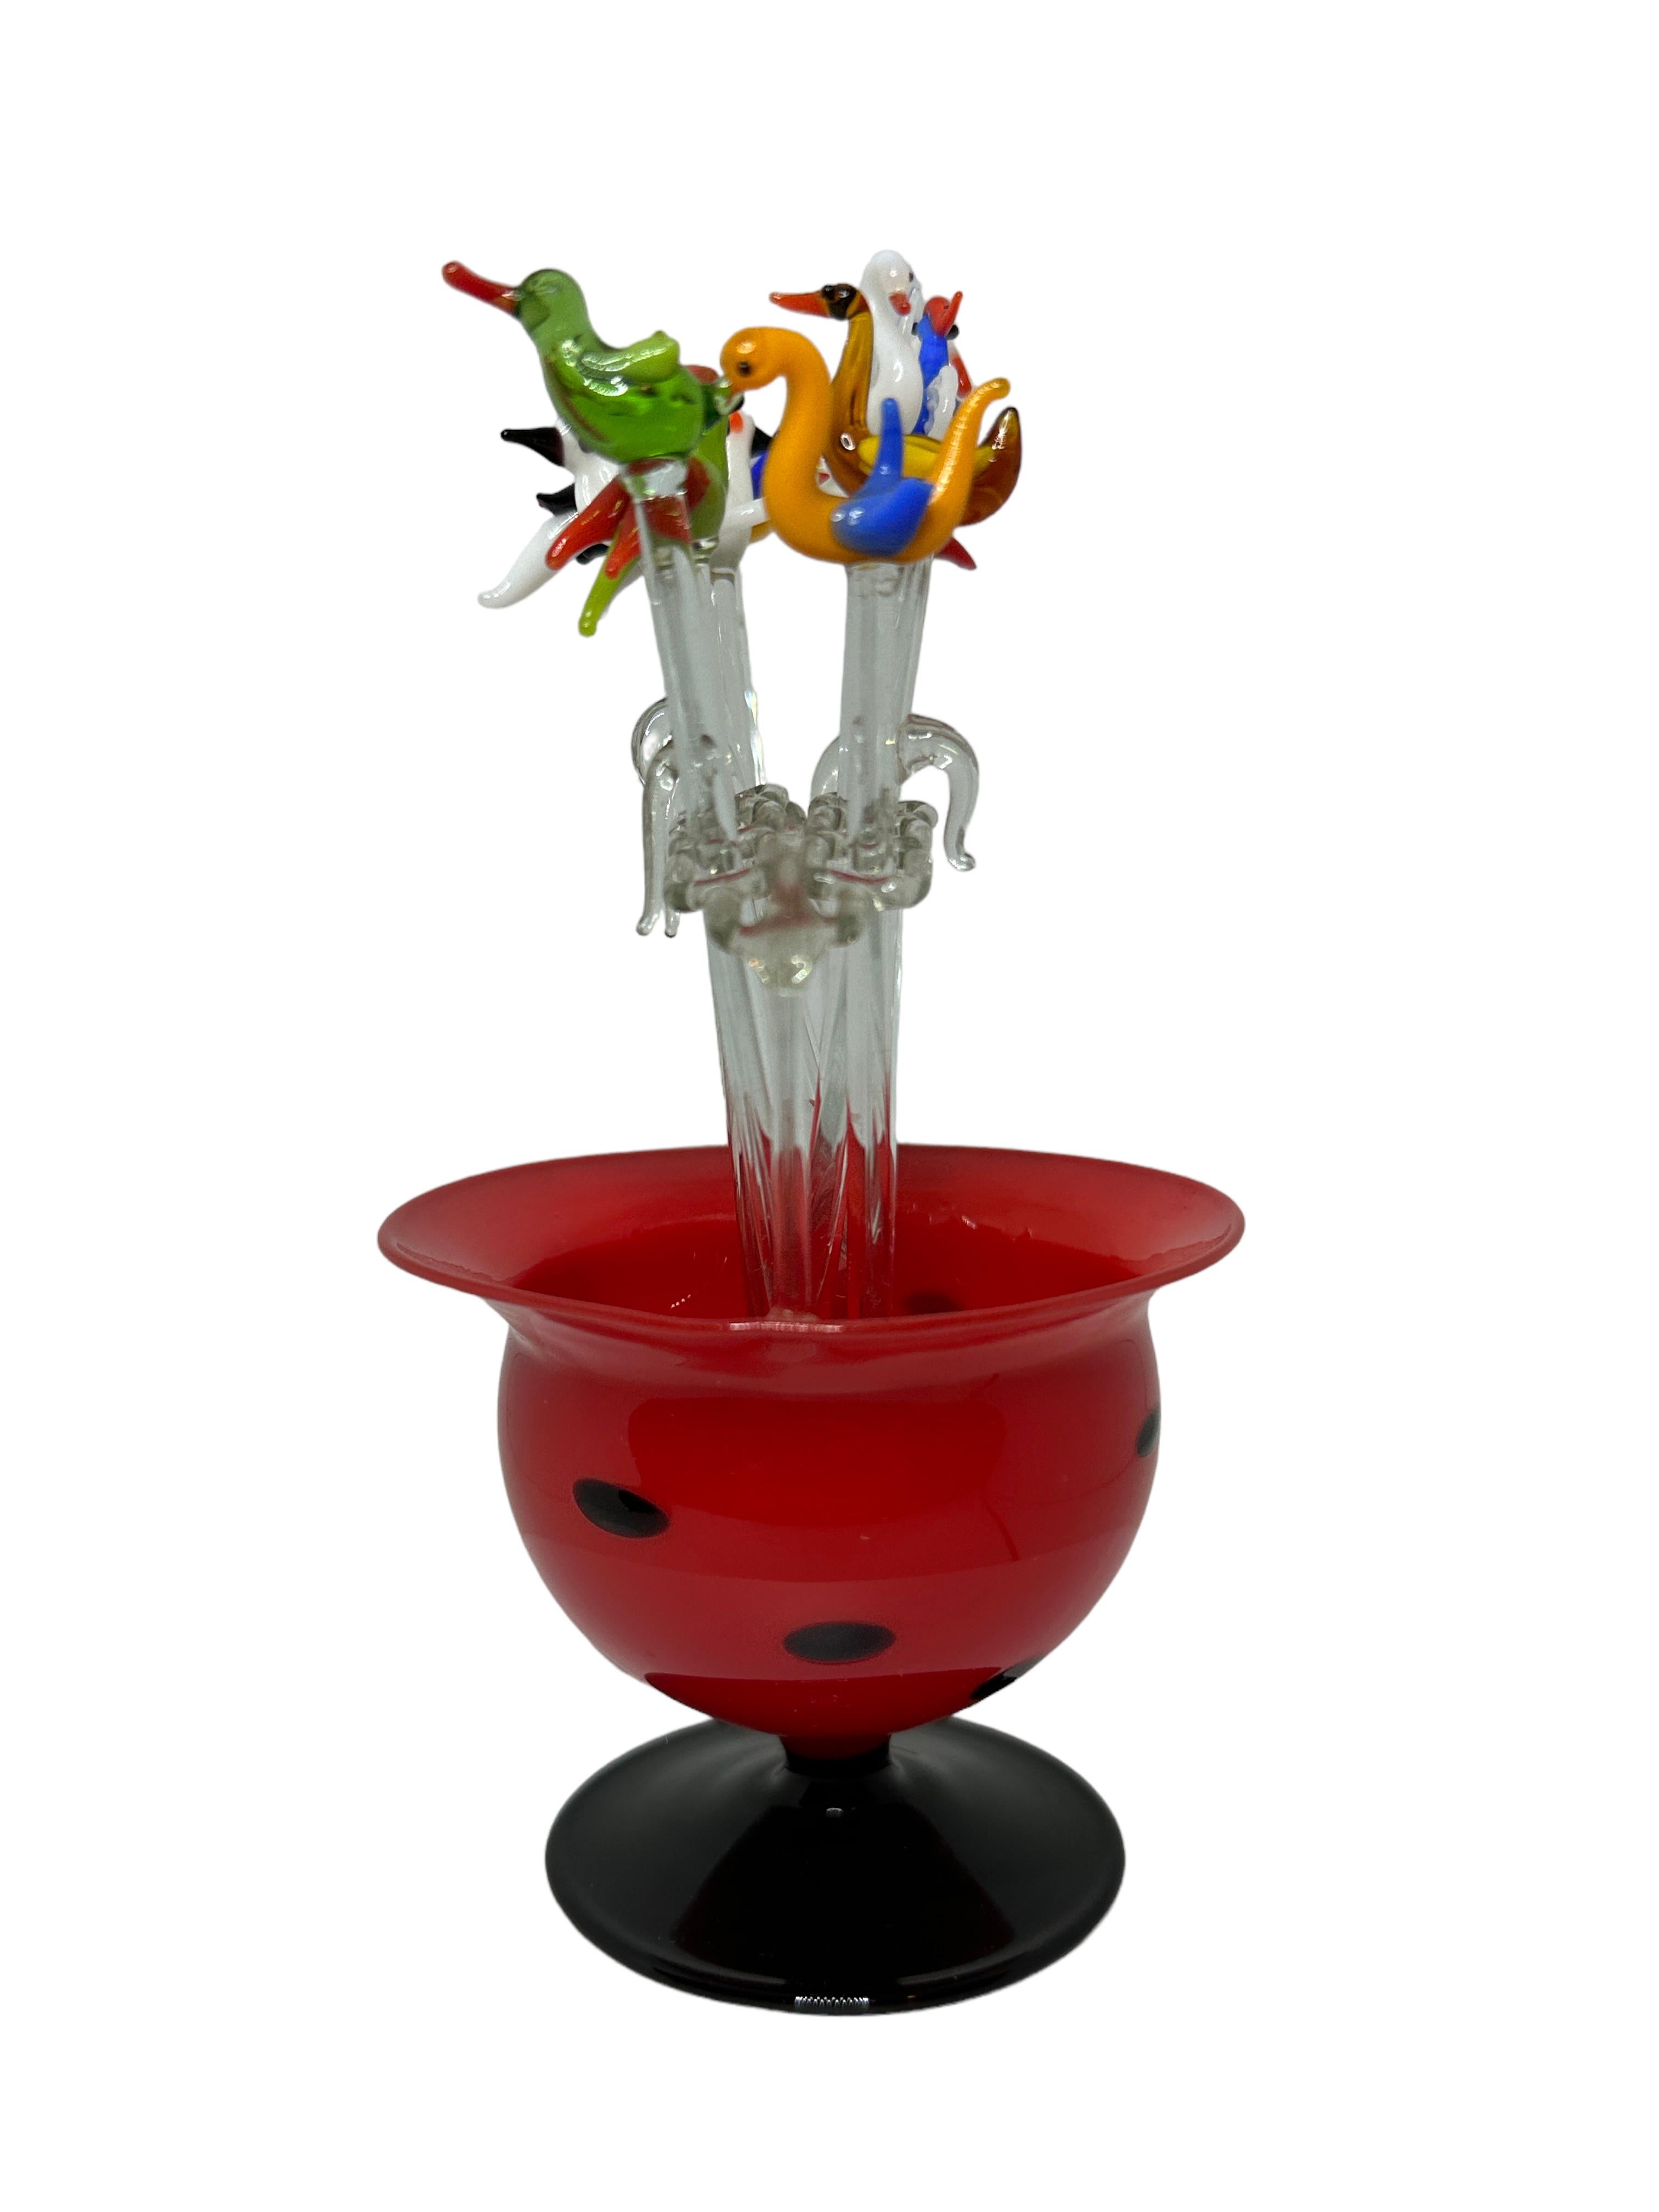 Mid-Century Modern Bimini Glass Cocktail Picks with Red Bowl Stand, 1920s, Vienna Austria For Sale